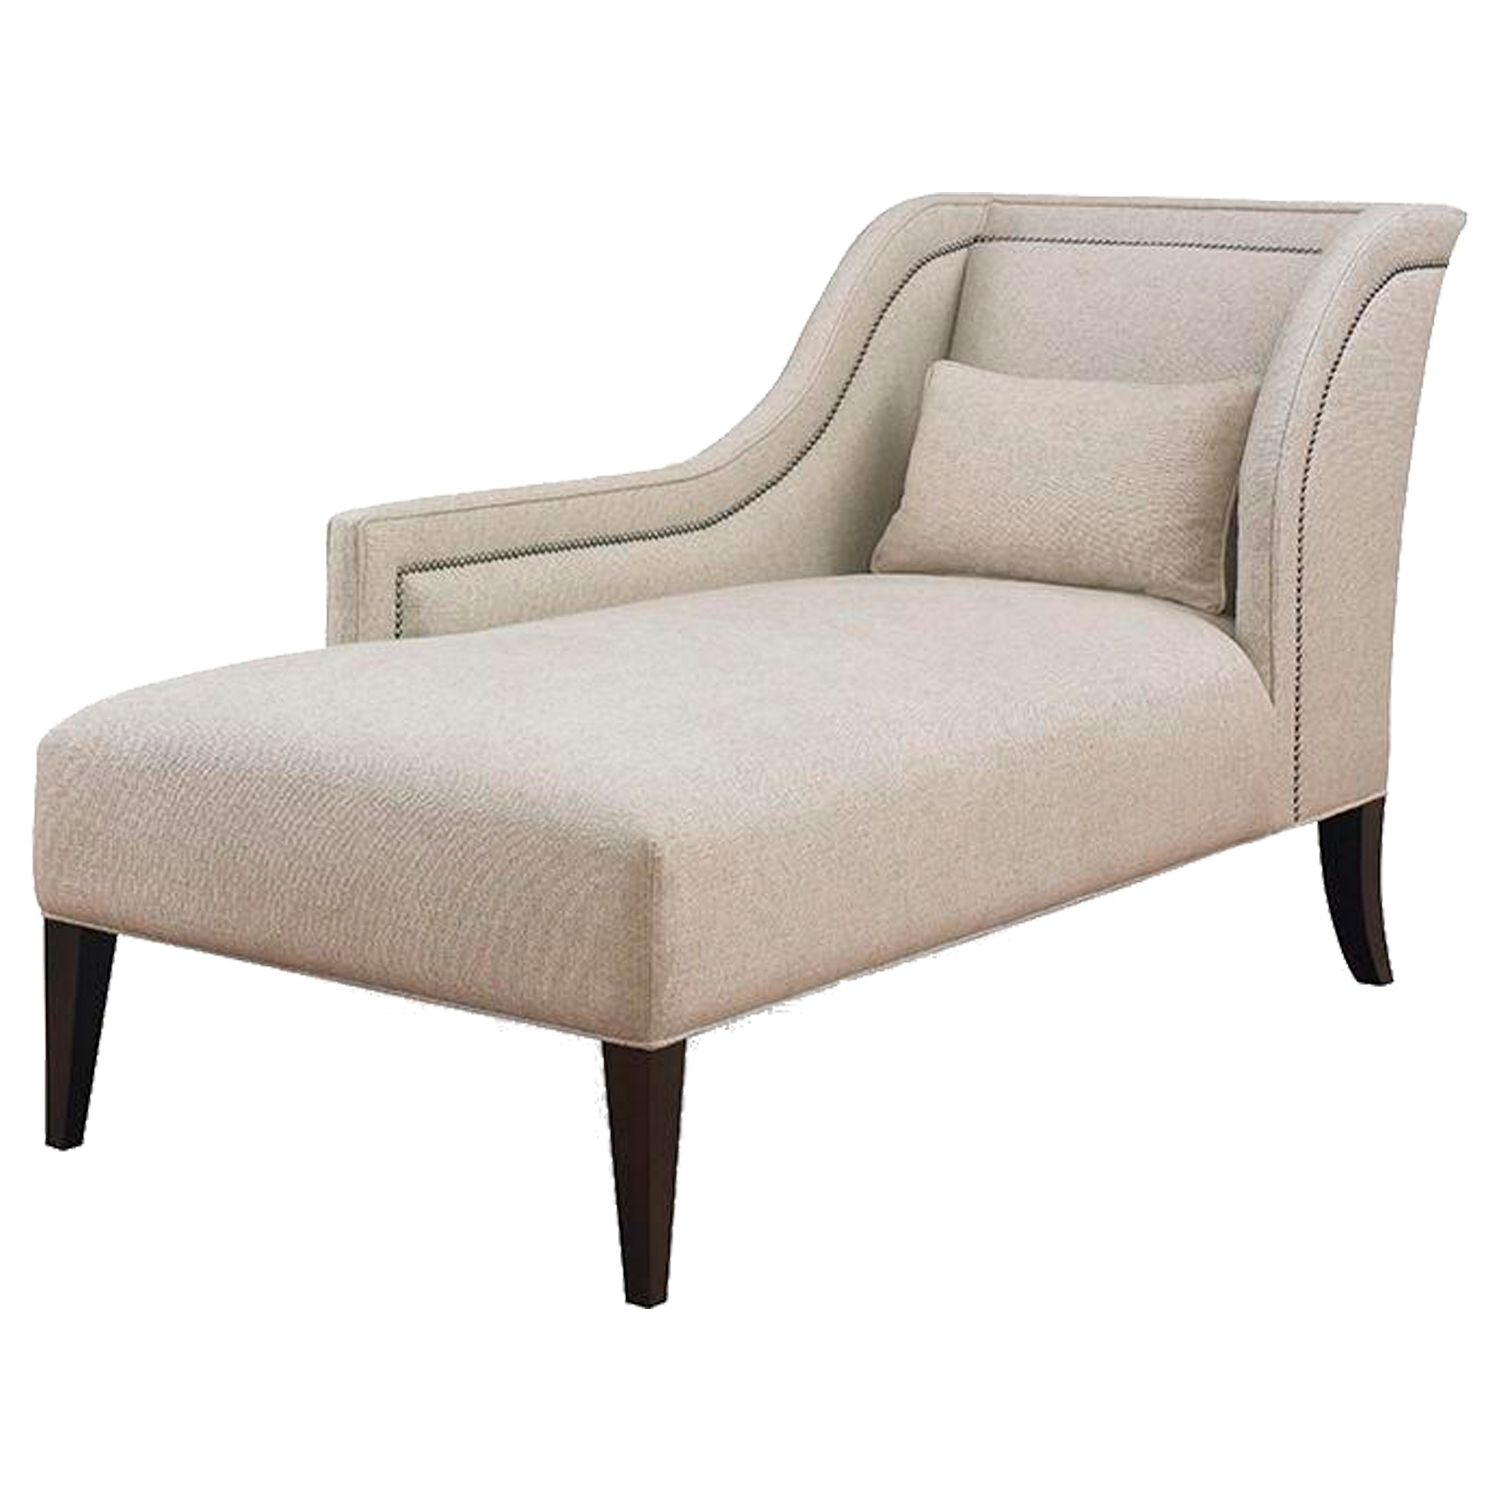 Buy Pasadena One Arm Chaisekravet – Made To Order Designer In Most Current Upholstered Chaise Lounges (View 2 of 15)